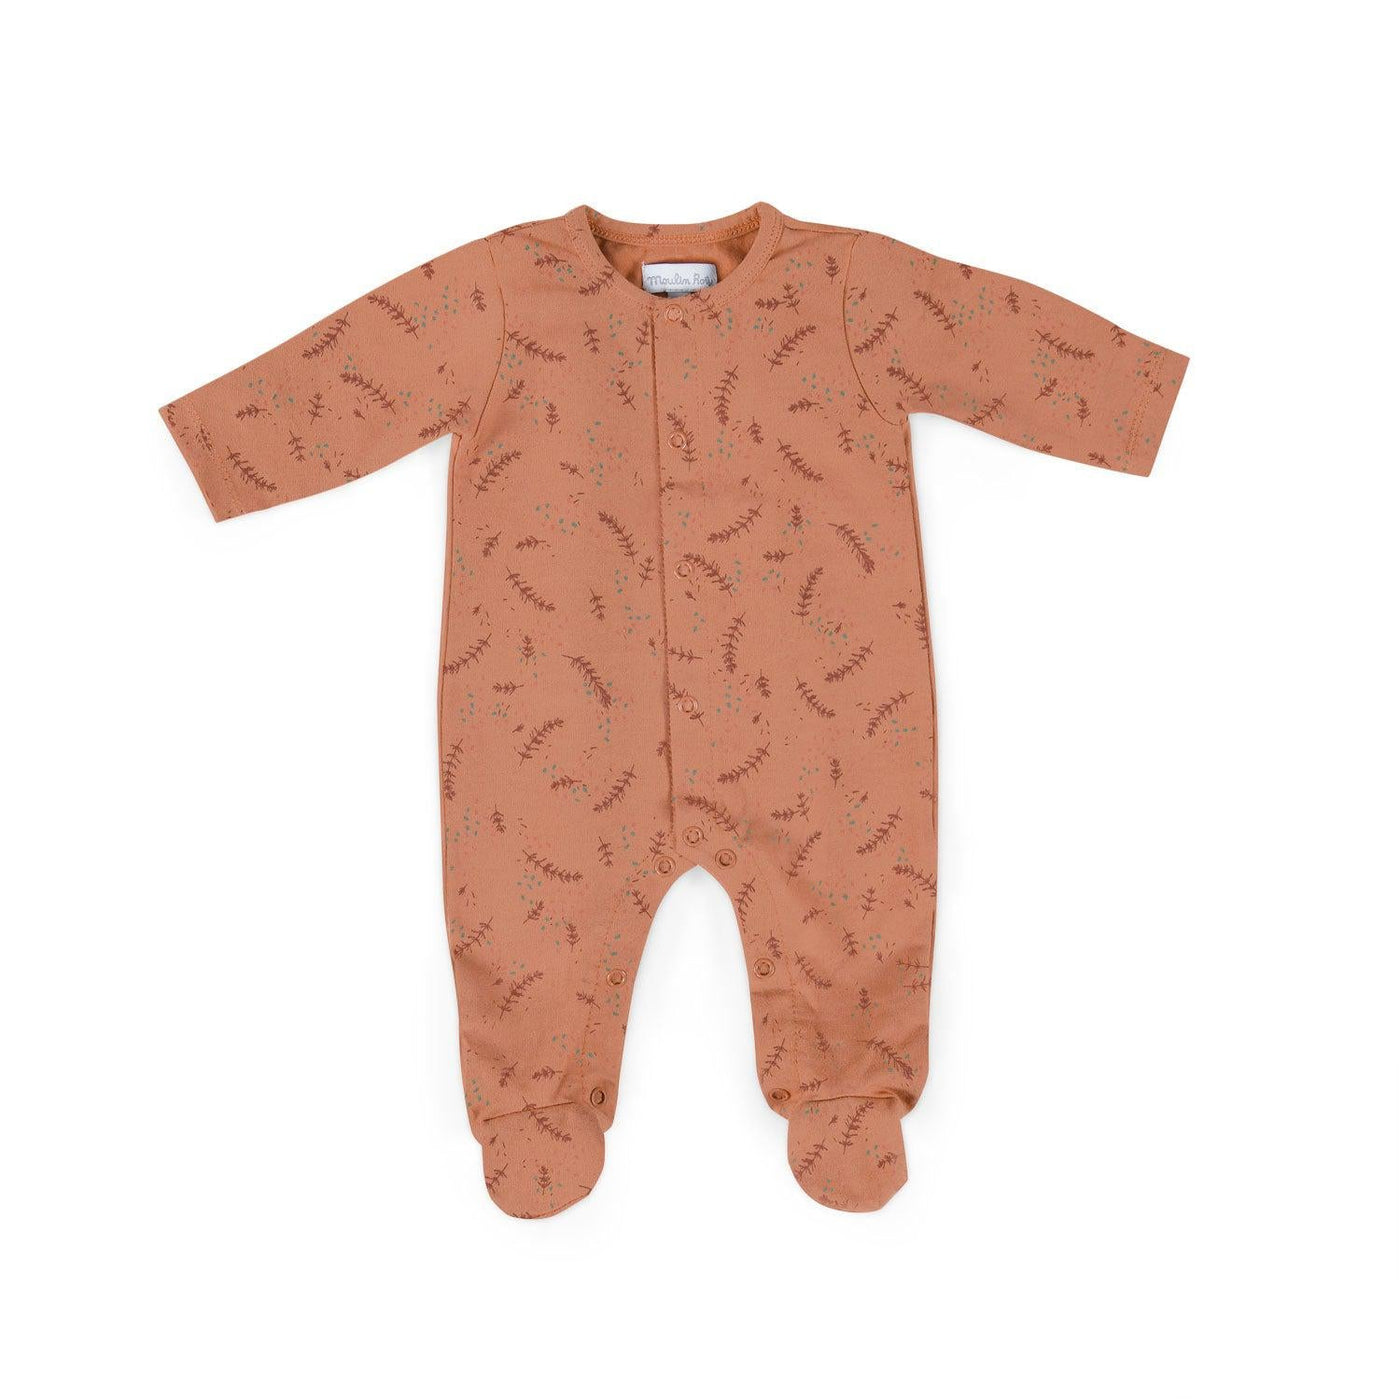 Clay Sleepsuit - Trois Petits Lapins-Sleepsuit-Moulin Roty-Yes Bebe